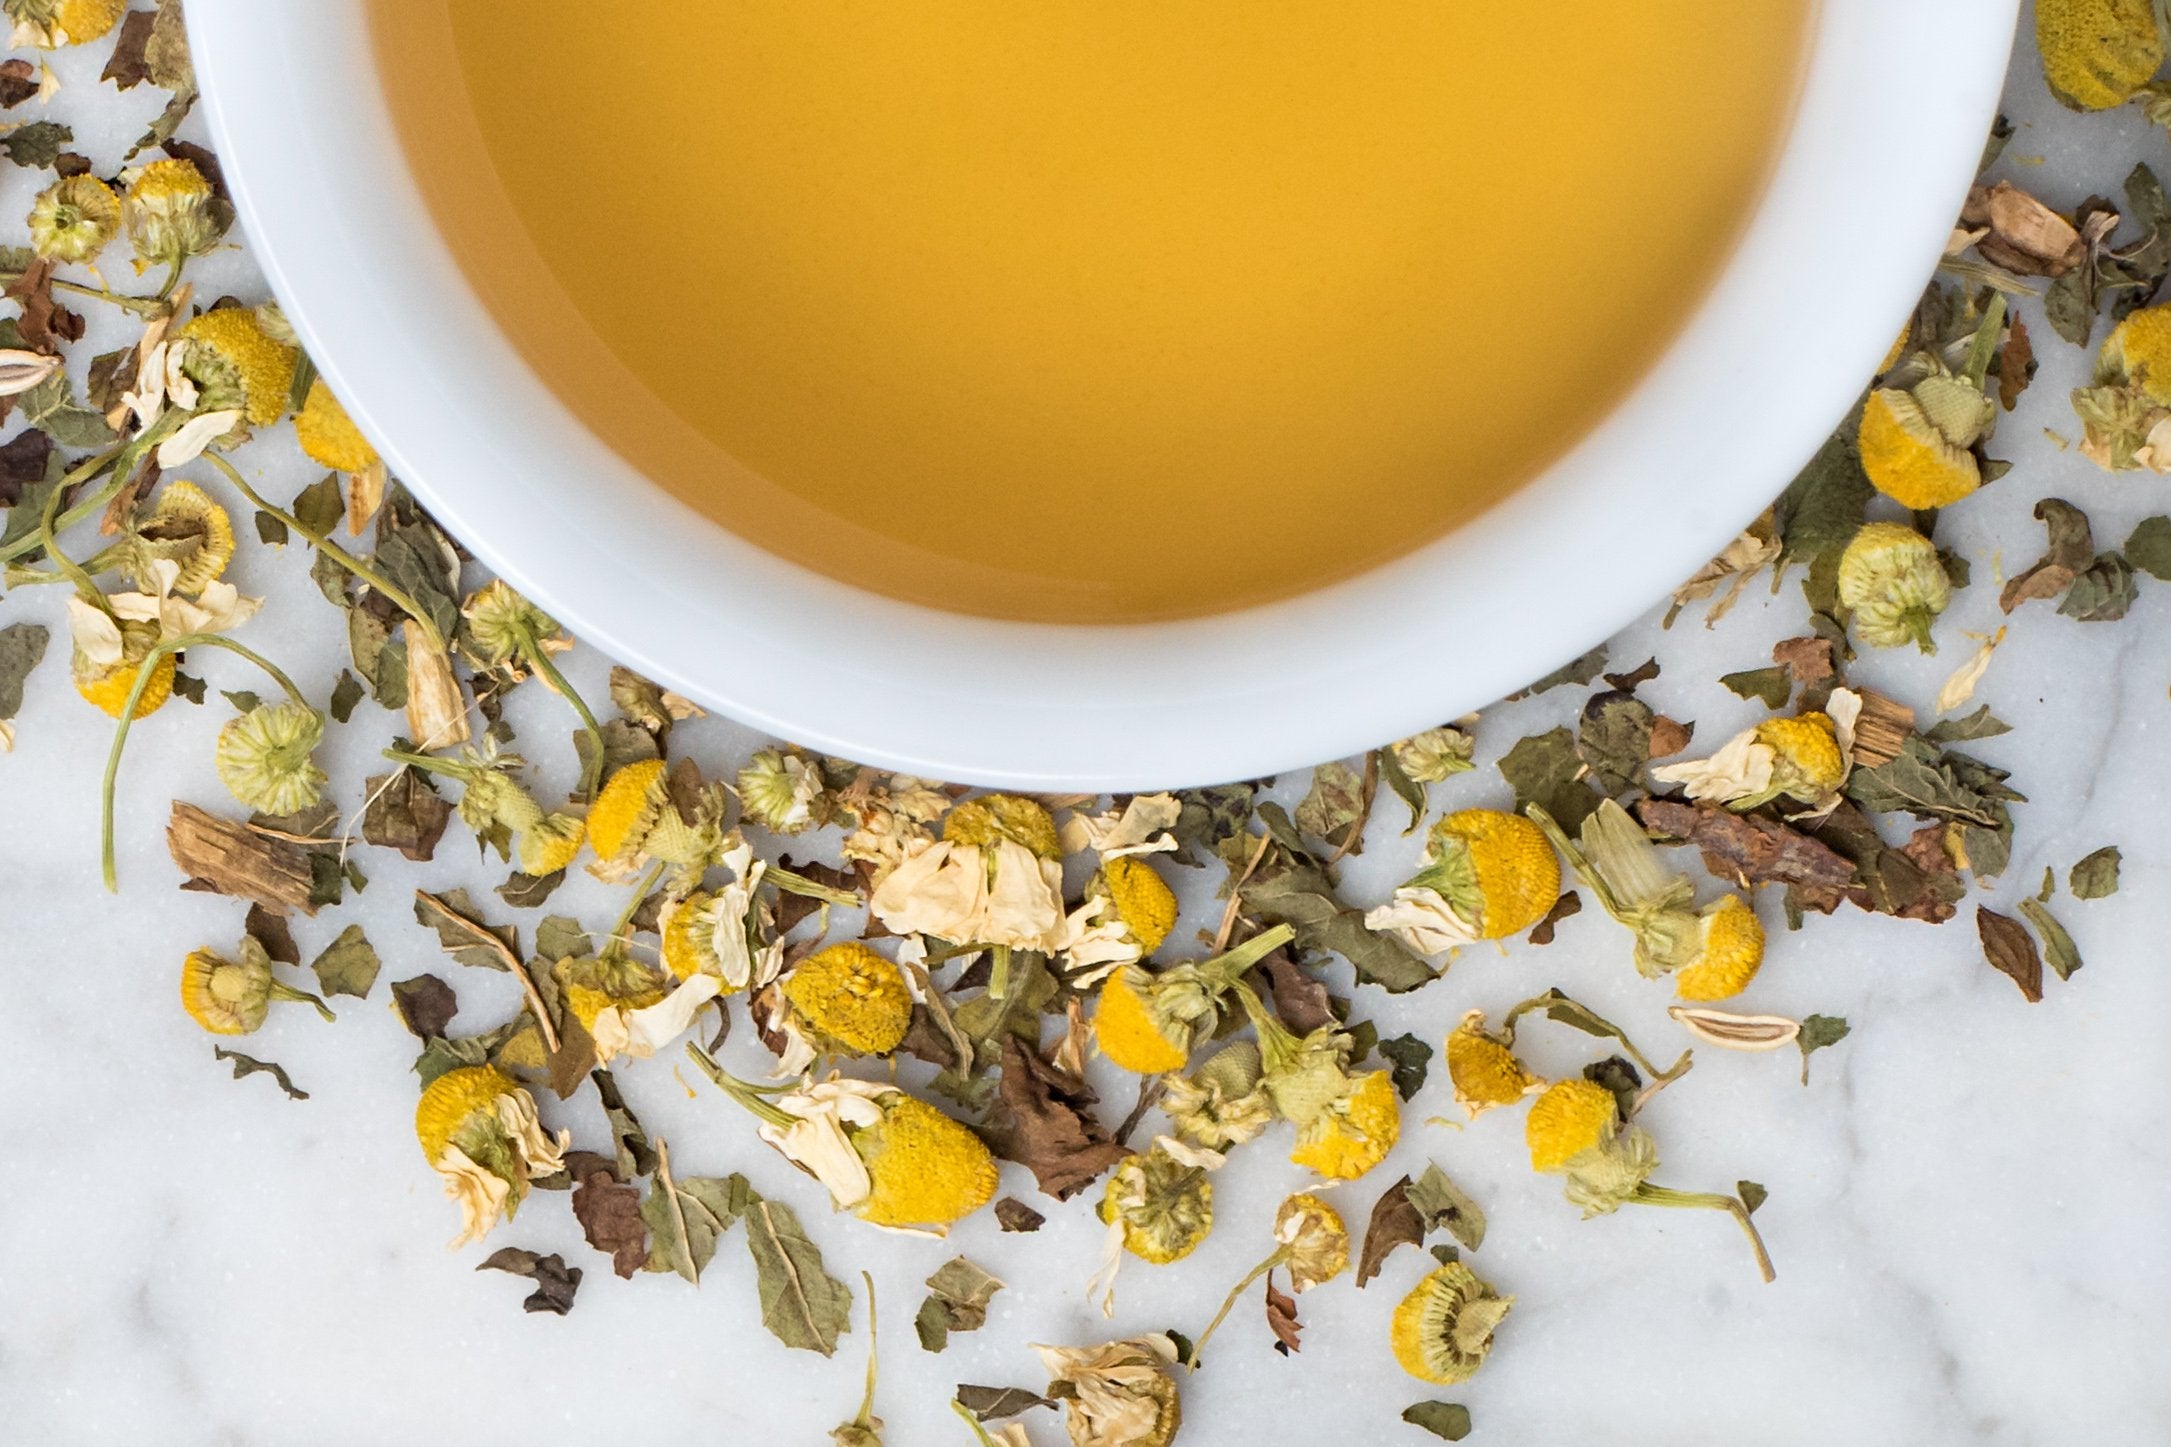 Soothe Your Tummy And Fight Inflammation With This Creamy Cardamom-Gin –  Loose Leaf Tea Market